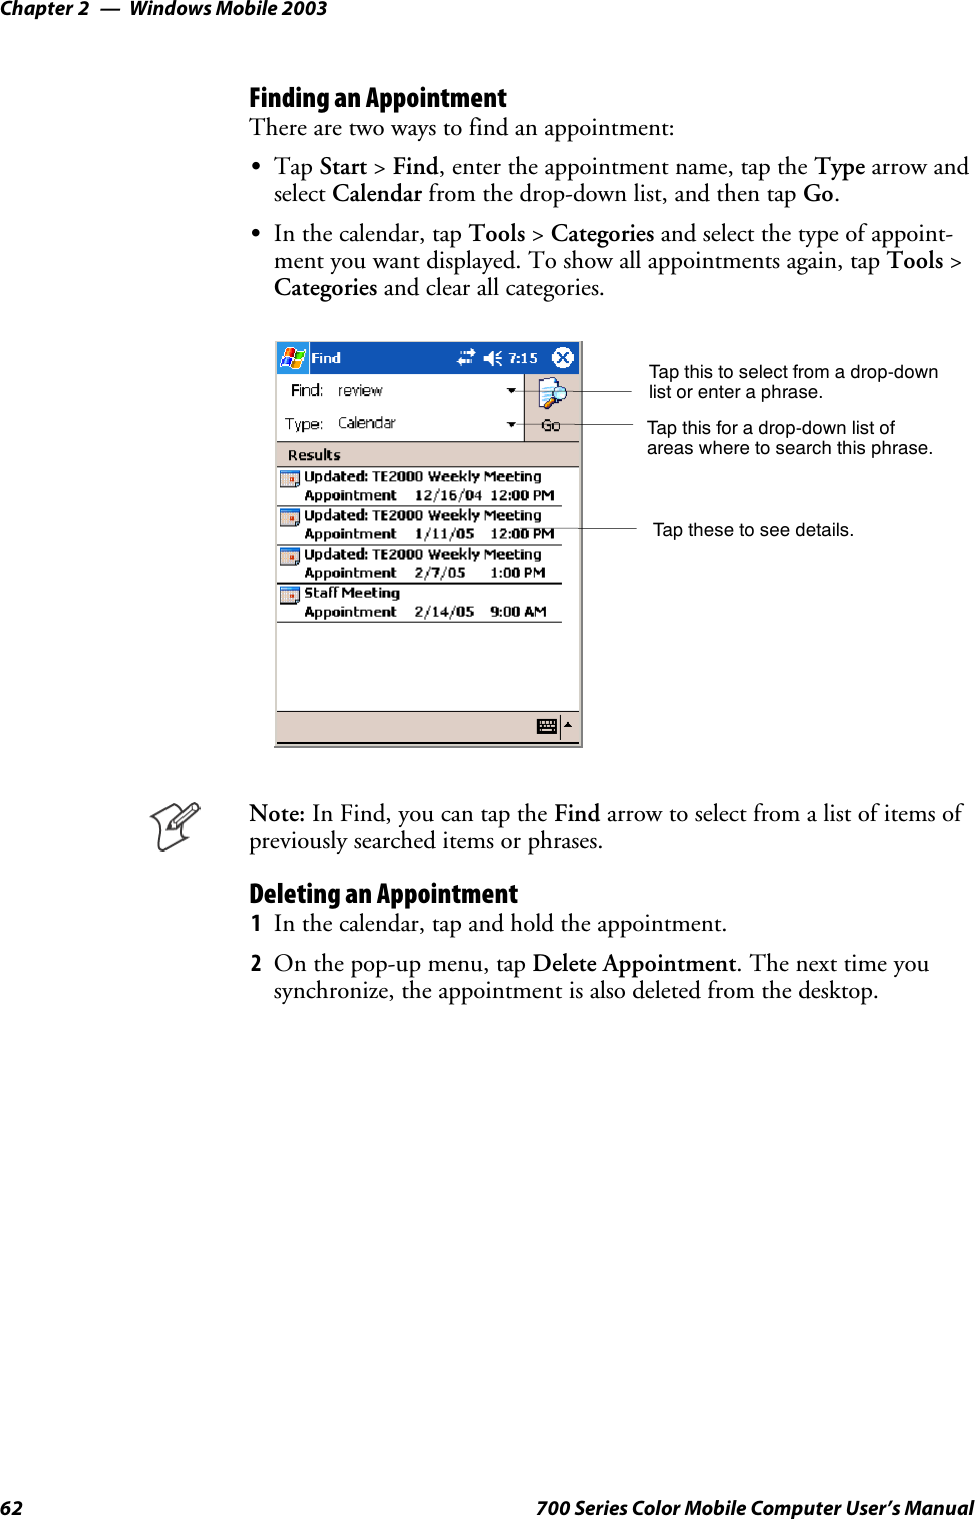 Windows Mobile 2003Chapter —262 700 Series Color Mobile Computer User’s ManualFinding an AppointmentThere are two ways to find an appointment:STap Start &gt;Find, enter the appointment name, tap the Type arrow andselect Calendar from the drop-down list, and then tap Go.SIn the calendar, tap Tools &gt;Categories and select the type of appoint-ment you want displayed. To show all appointments again, tap Tools &gt;Categories and clear all categories.Tap this to select from a drop-downlist or enter a phrase.Tap this for a drop-down list ofareas where to search this phrase.Tap these to see details.Note: In Find, you can tap the Find arrow to select from a list of items ofpreviously searched items or phrases.Deleting an Appointment1In the calendar, tap and hold the appointment.2On the pop-up menu, tap Delete Appointment.Thenexttimeyousynchronize, the appointment is also deleted from the desktop.